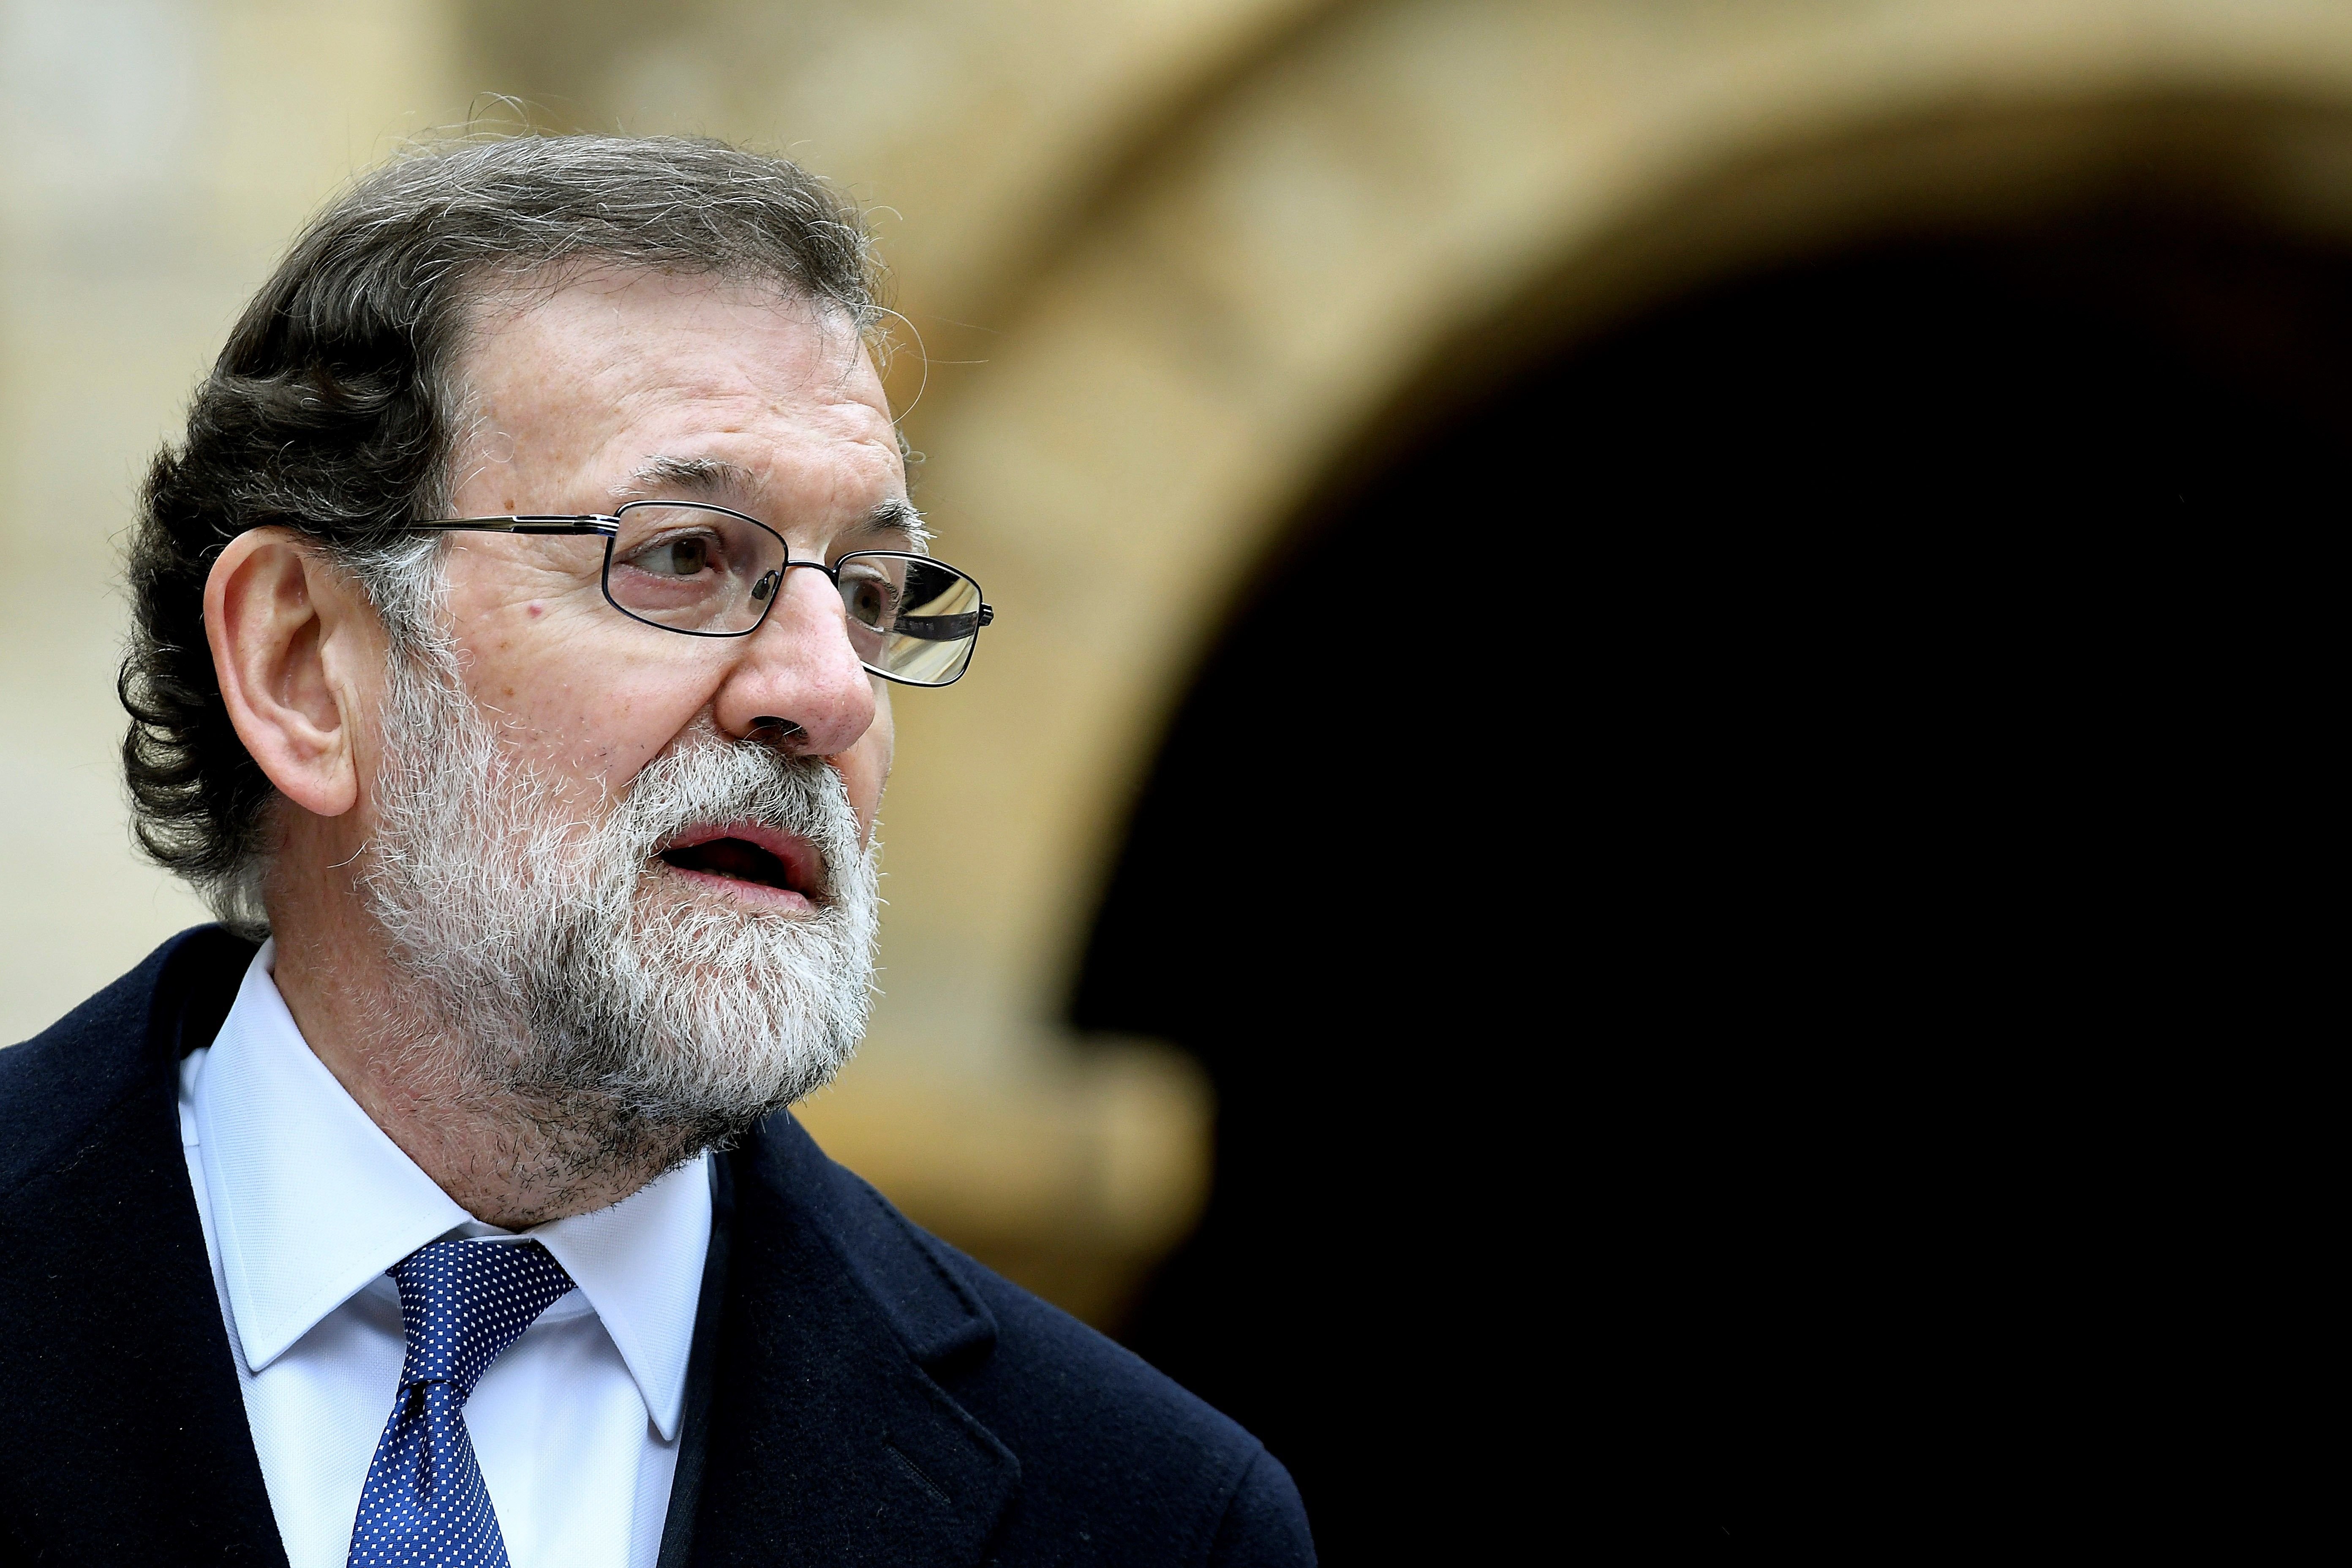 Rajoy ignores Council of State, will appeal Puigdemont's investiture